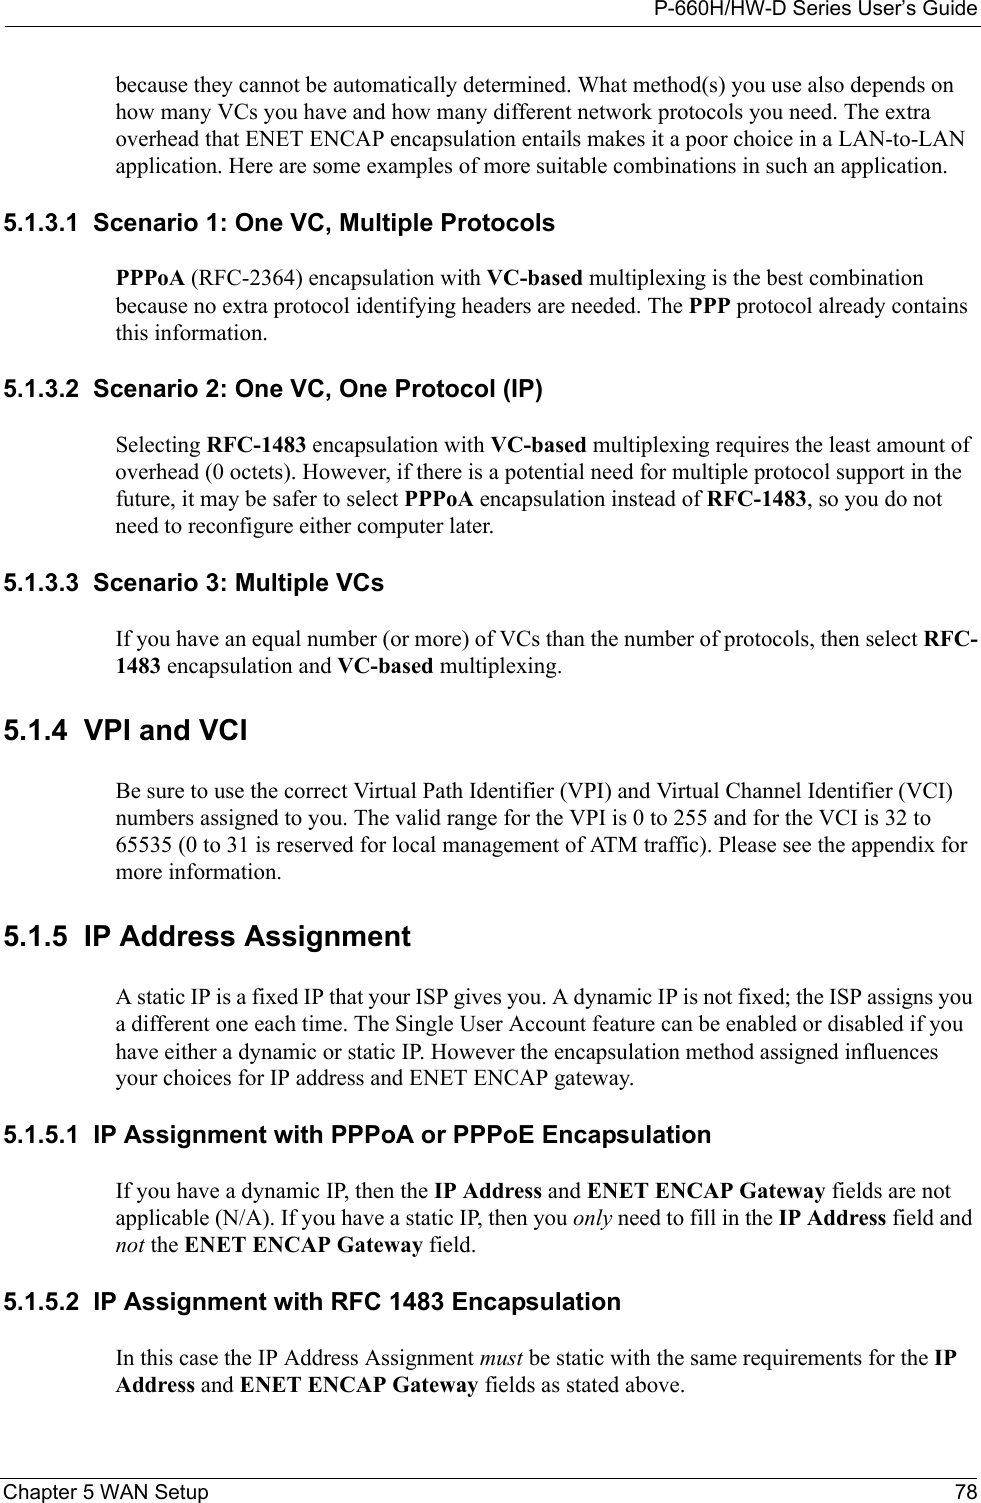 P-660H/HW-D Series User’s GuideChapter 5 WAN Setup 78because they cannot be automatically determined. What method(s) you use also depends on how many VCs you have and how many different network protocols you need. The extra overhead that ENET ENCAP encapsulation entails makes it a poor choice in a LAN-to-LAN application. Here are some examples of more suitable combinations in such an application.5.1.3.1  Scenario 1: One VC, Multiple ProtocolsPPPoA (RFC-2364) encapsulation with VC-based multiplexing is the best combination because no extra protocol identifying headers are needed. The PPP protocol already contains this information.5.1.3.2  Scenario 2: One VC, One Protocol (IP)Selecting RFC-1483 encapsulation with VC-based multiplexing requires the least amount of overhead (0 octets). However, if there is a potential need for multiple protocol support in the future, it may be safer to select PPPoA encapsulation instead of RFC-1483, so you do not need to reconfigure either computer later.5.1.3.3  Scenario 3: Multiple VCsIf you have an equal number (or more) of VCs than the number of protocols, then select RFC-1483 encapsulation and VC-based multiplexing.5.1.4  VPI and VCIBe sure to use the correct Virtual Path Identifier (VPI) and Virtual Channel Identifier (VCI) numbers assigned to you. The valid range for the VPI is 0 to 255 and for the VCI is 32 to 65535 (0 to 31 is reserved for local management of ATM traffic). Please see the appendix for more information.5.1.5  IP Address AssignmentA static IP is a fixed IP that your ISP gives you. A dynamic IP is not fixed; the ISP assigns you a different one each time. The Single User Account feature can be enabled or disabled if you have either a dynamic or static IP. However the encapsulation method assigned influences your choices for IP address and ENET ENCAP gateway.5.1.5.1  IP Assignment with PPPoA or PPPoE EncapsulationIf you have a dynamic IP, then the IP Address and ENET ENCAP Gateway fields are not applicable (N/A). If you have a static IP, then you only need to fill in the IP Address field and not the ENET ENCAP Gateway field.5.1.5.2  IP Assignment with RFC 1483 EncapsulationIn this case the IP Address Assignment must be static with the same requirements for the IP Address and ENET ENCAP Gateway fields as stated above.